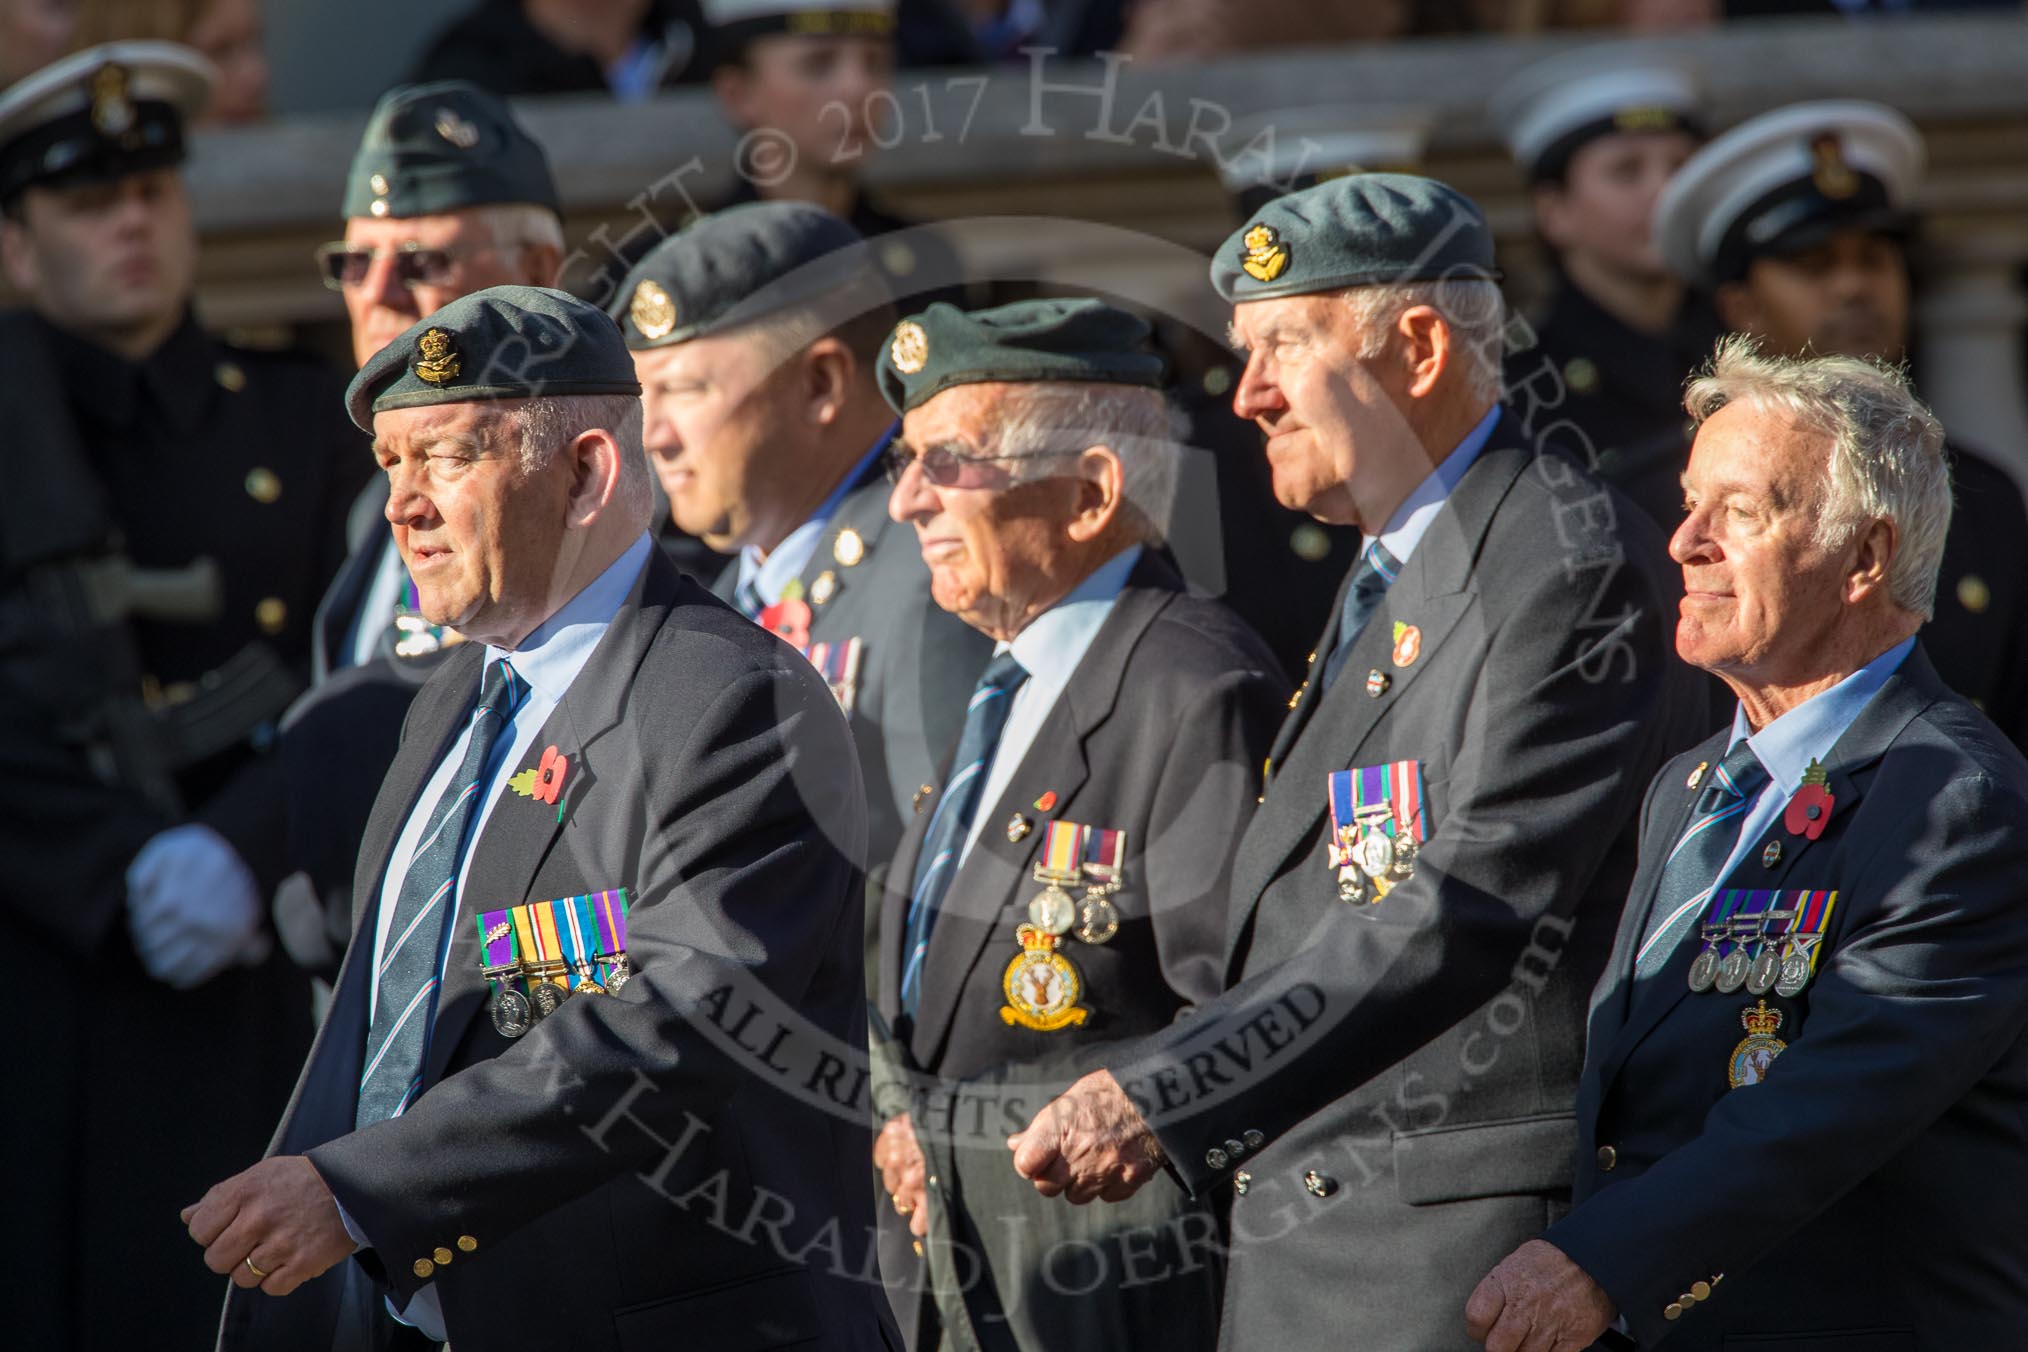 33 Squadron Association - RAF (Group C24, 23 members) during the Royal British Legion March Past on Remembrance Sunday at the Cenotaph, Whitehall, Westminster, London, 11 November 2018, 12:18.